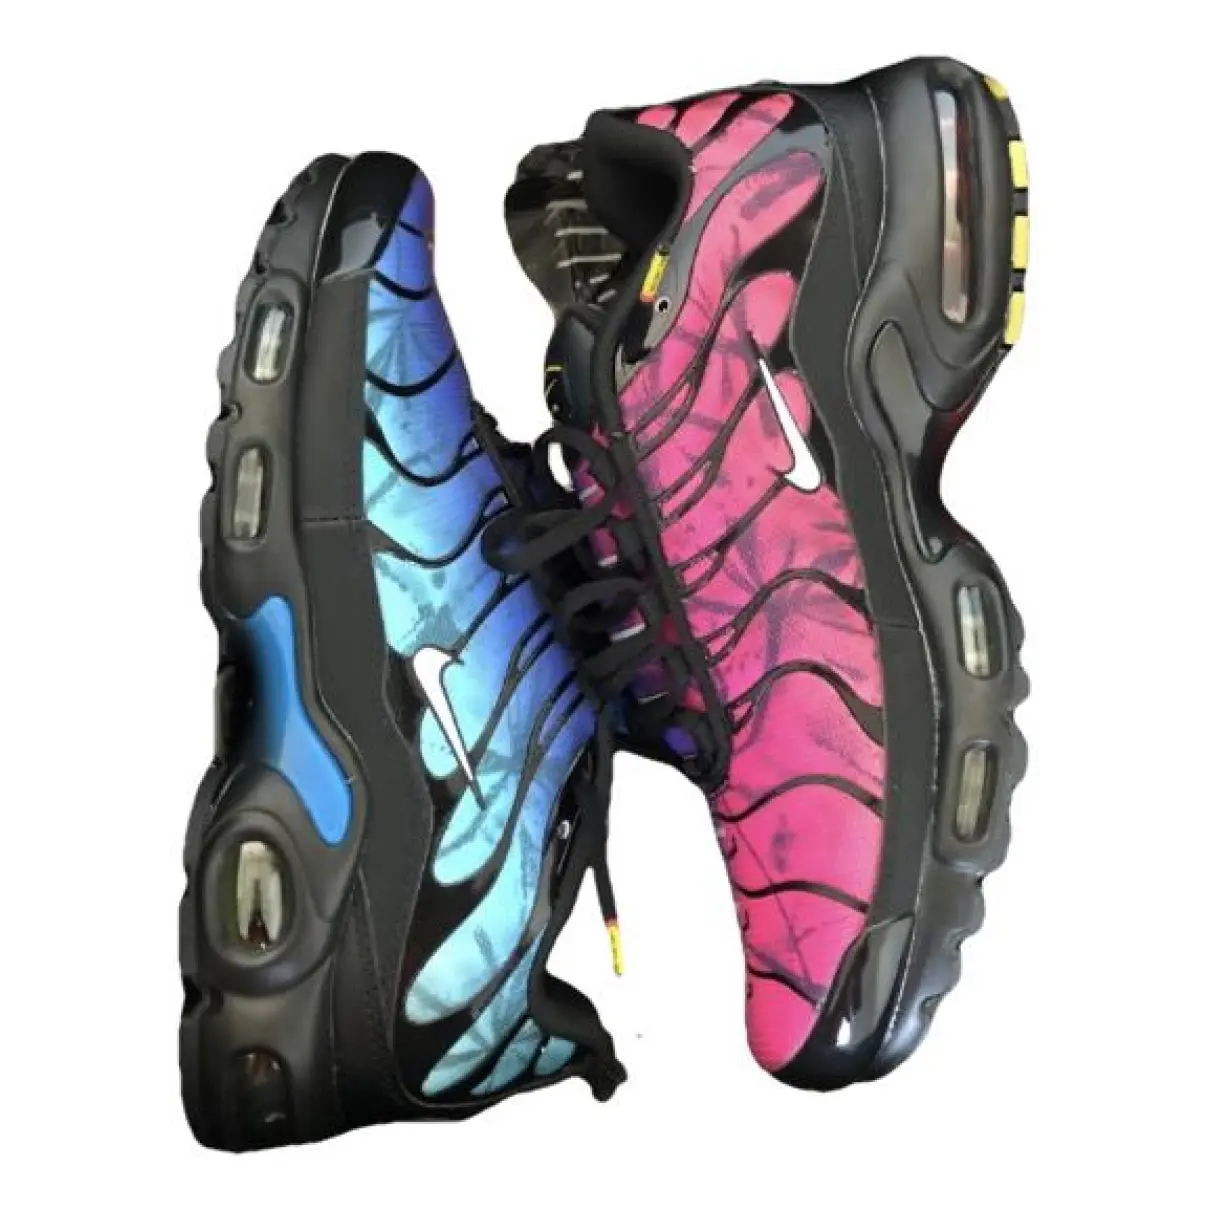 Air Max Plus low trainers